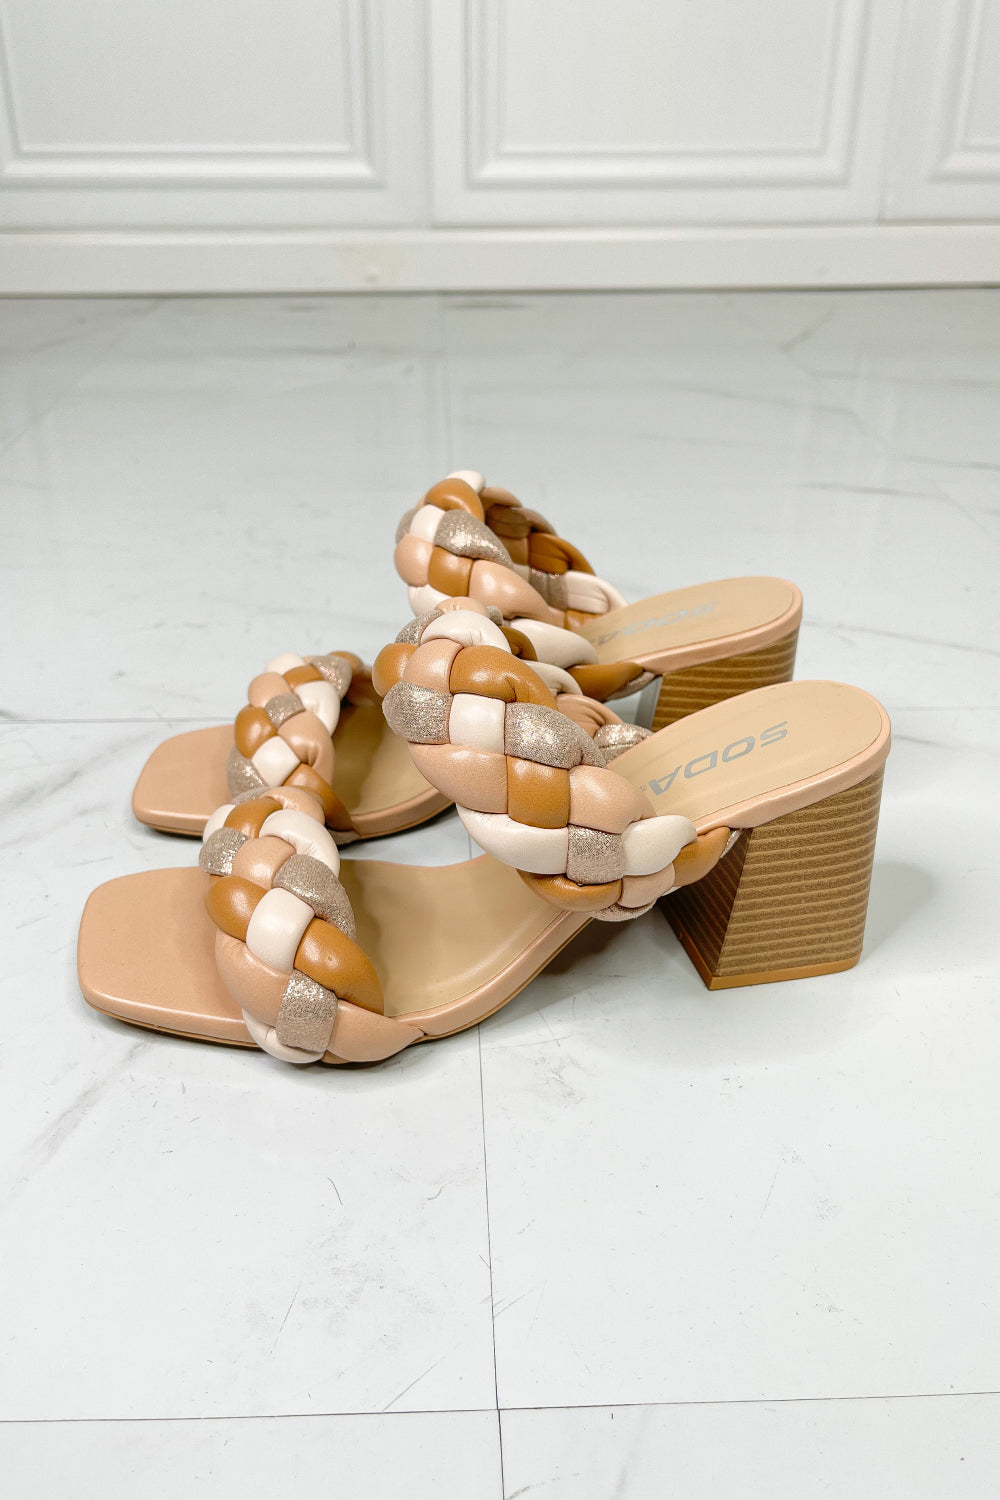 SODA Interwoven Ideas Braided Strap Block Heel Slide Sandal in Nude  Southern Soul Collectives 